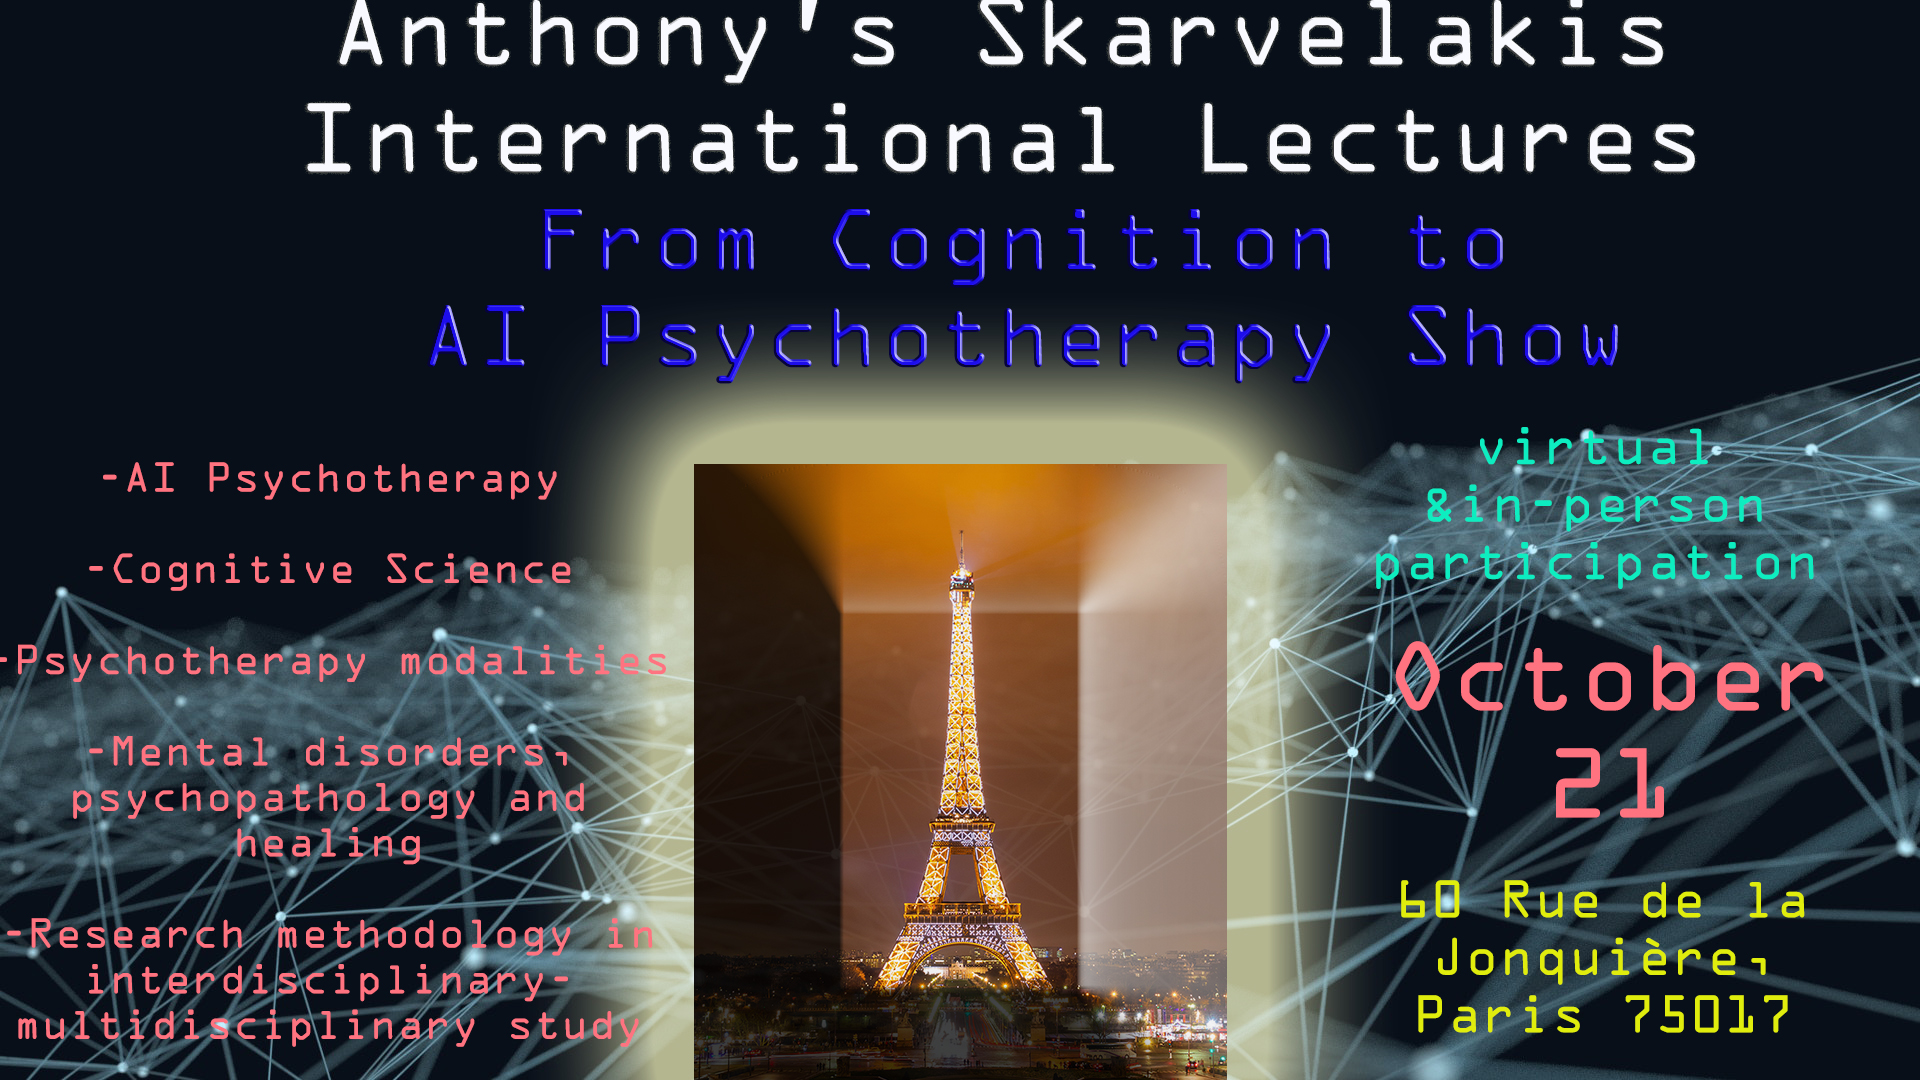 From Cognition to AI Psychotherapy Show, Anthony’s Skarvelakis International Lectures